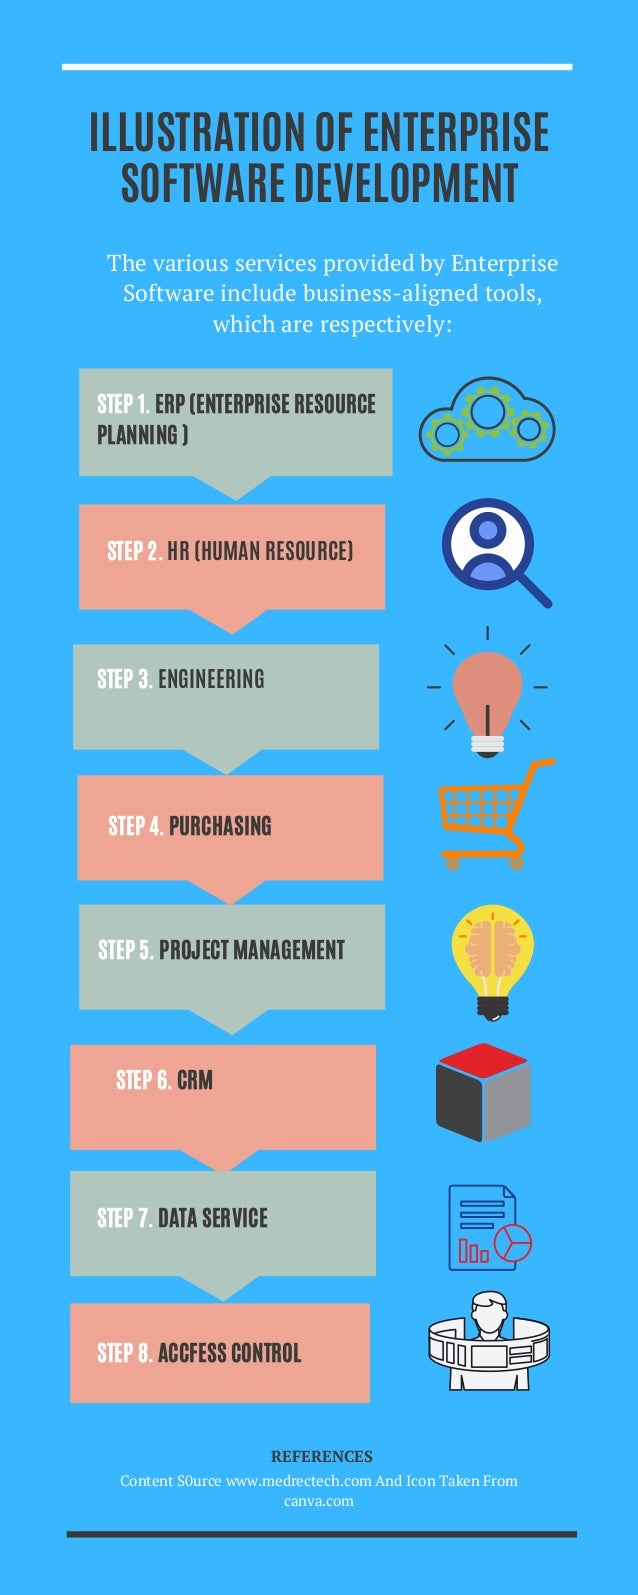 STEP 5. PROJECT MANAGEMENT
STEP 6. CRM
STEP 1. ERP (ENTERPRISE RESOURCE
PLANNING )
ILLUSTRATION OF ENTERPRISE
SOFTWARE DEVELOPMENT
The various services provided by Enterprise
Software include business-aligned tools,
which are respectively:
Content S0urce www.medrectech.com And Icon Taken From
canva.com
REFERENCES
STEP 2. HR (HUMAN RESOURCE)
STEP 3. ENGINEERING
STEP 7. DATA SERVICE
STEP 4. PURCHASING
STEP 8. ACCFESS CONTROL
 